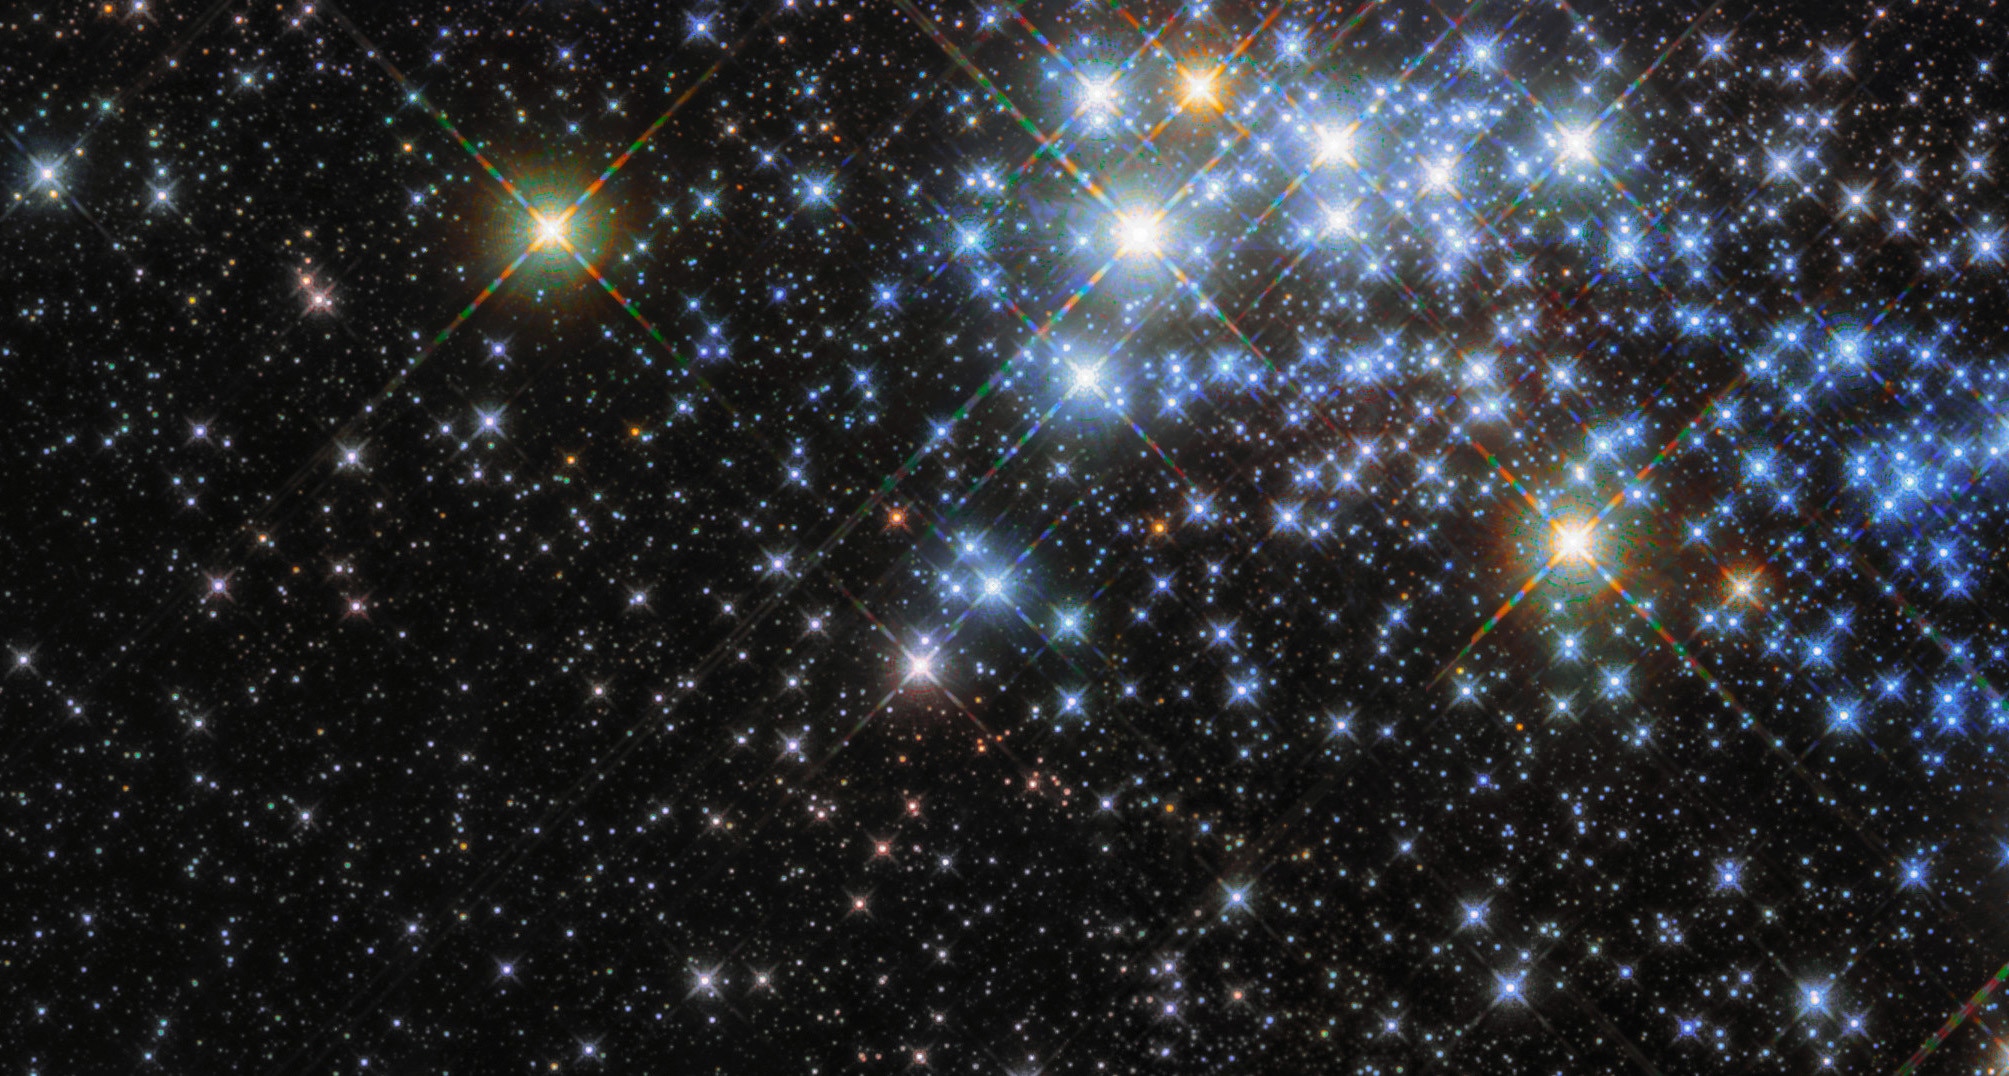 Hubble Space Telescope’s infrared view of the gigantic star cluster Westerlund 1 reveals thousands of stars, many of which are intensely luminous. Credit: ESA/Hubble & NASA